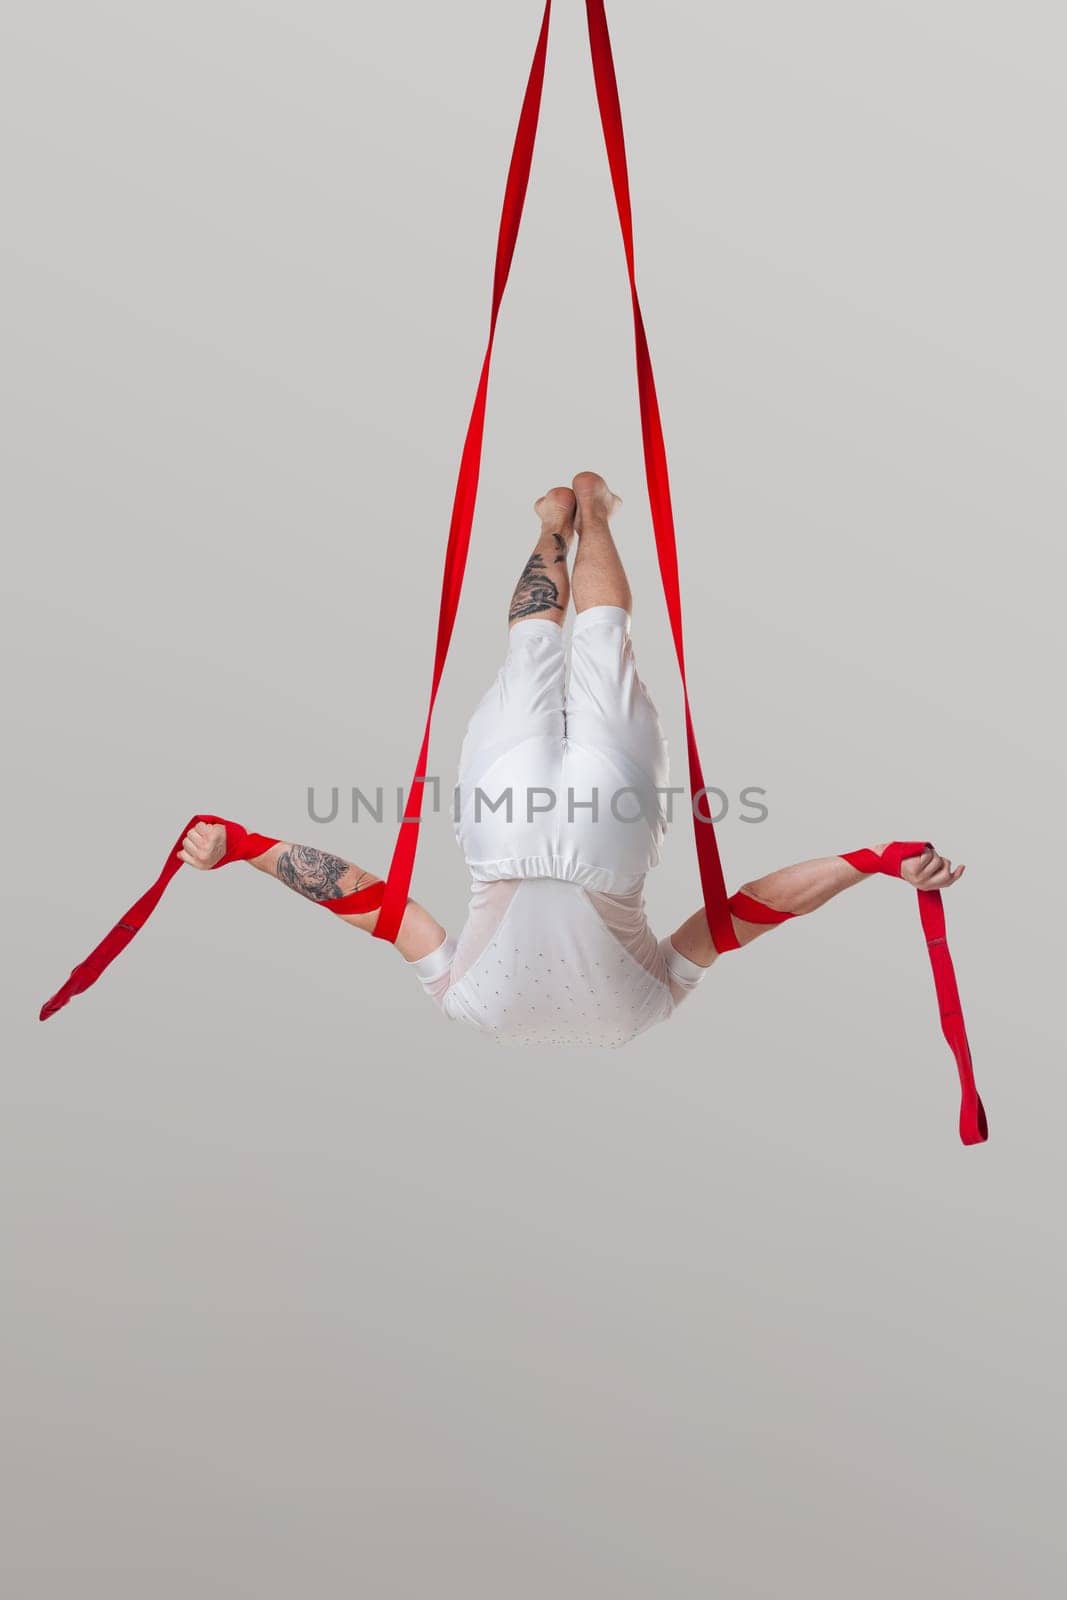 Sportsman performance on a red canvases. Tattoed man in a light sport suit is doing an acrobatic elements hanging on a rope in a studio isolated on white background. Dancing in the air with balance.